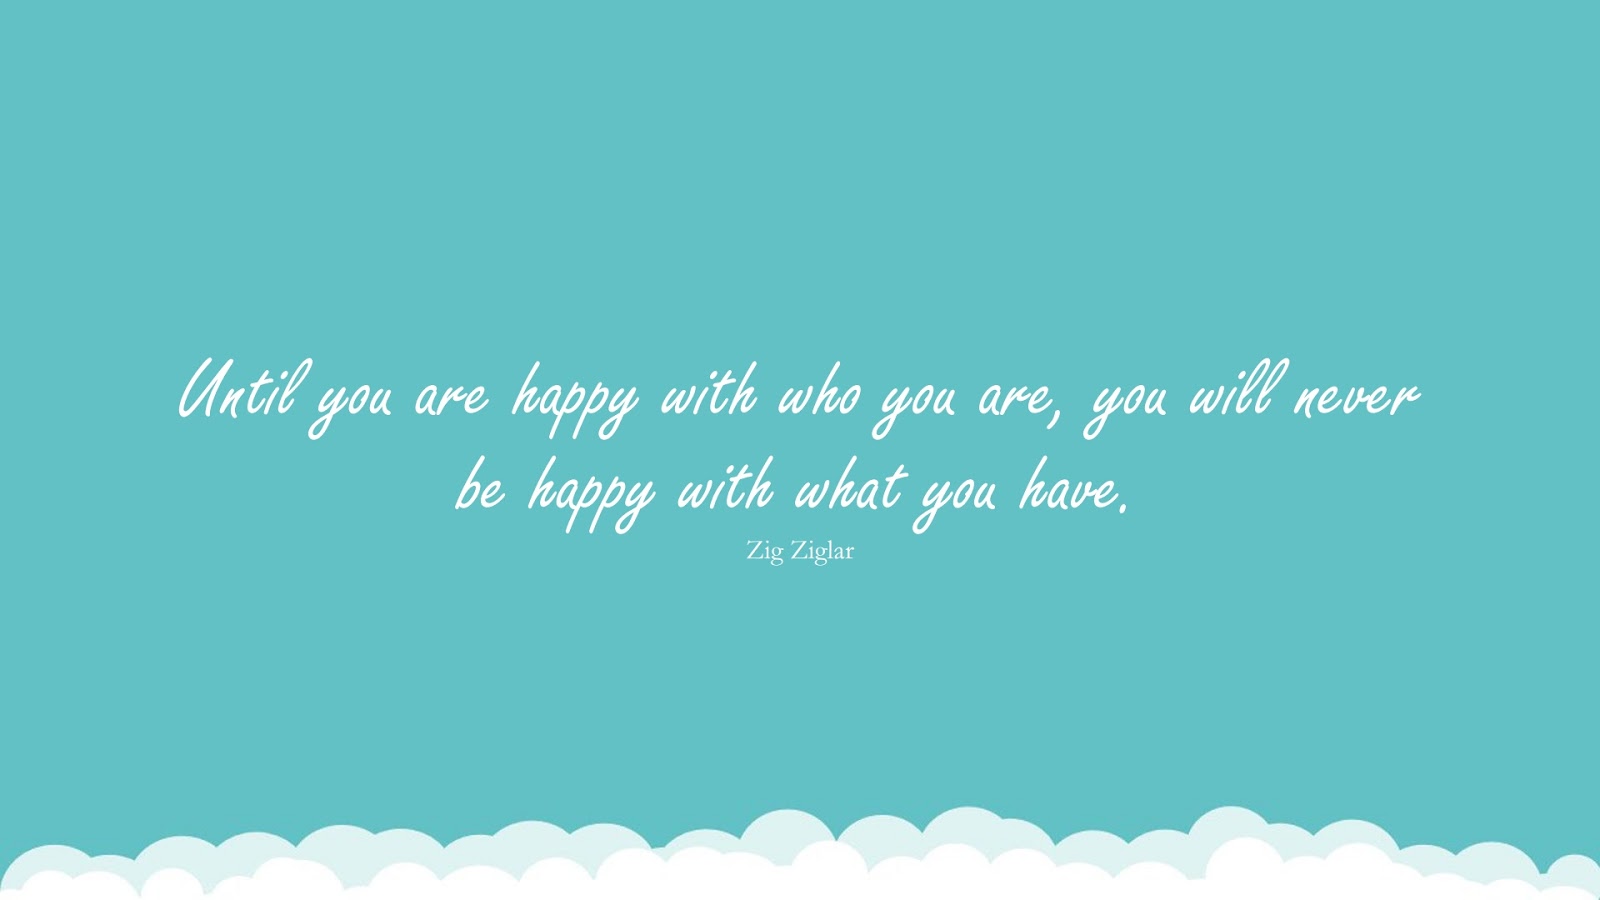 Until you are happy with who you are, you will never be happy with what you have. (Zig Ziglar);  #SelfEsteemQuotes